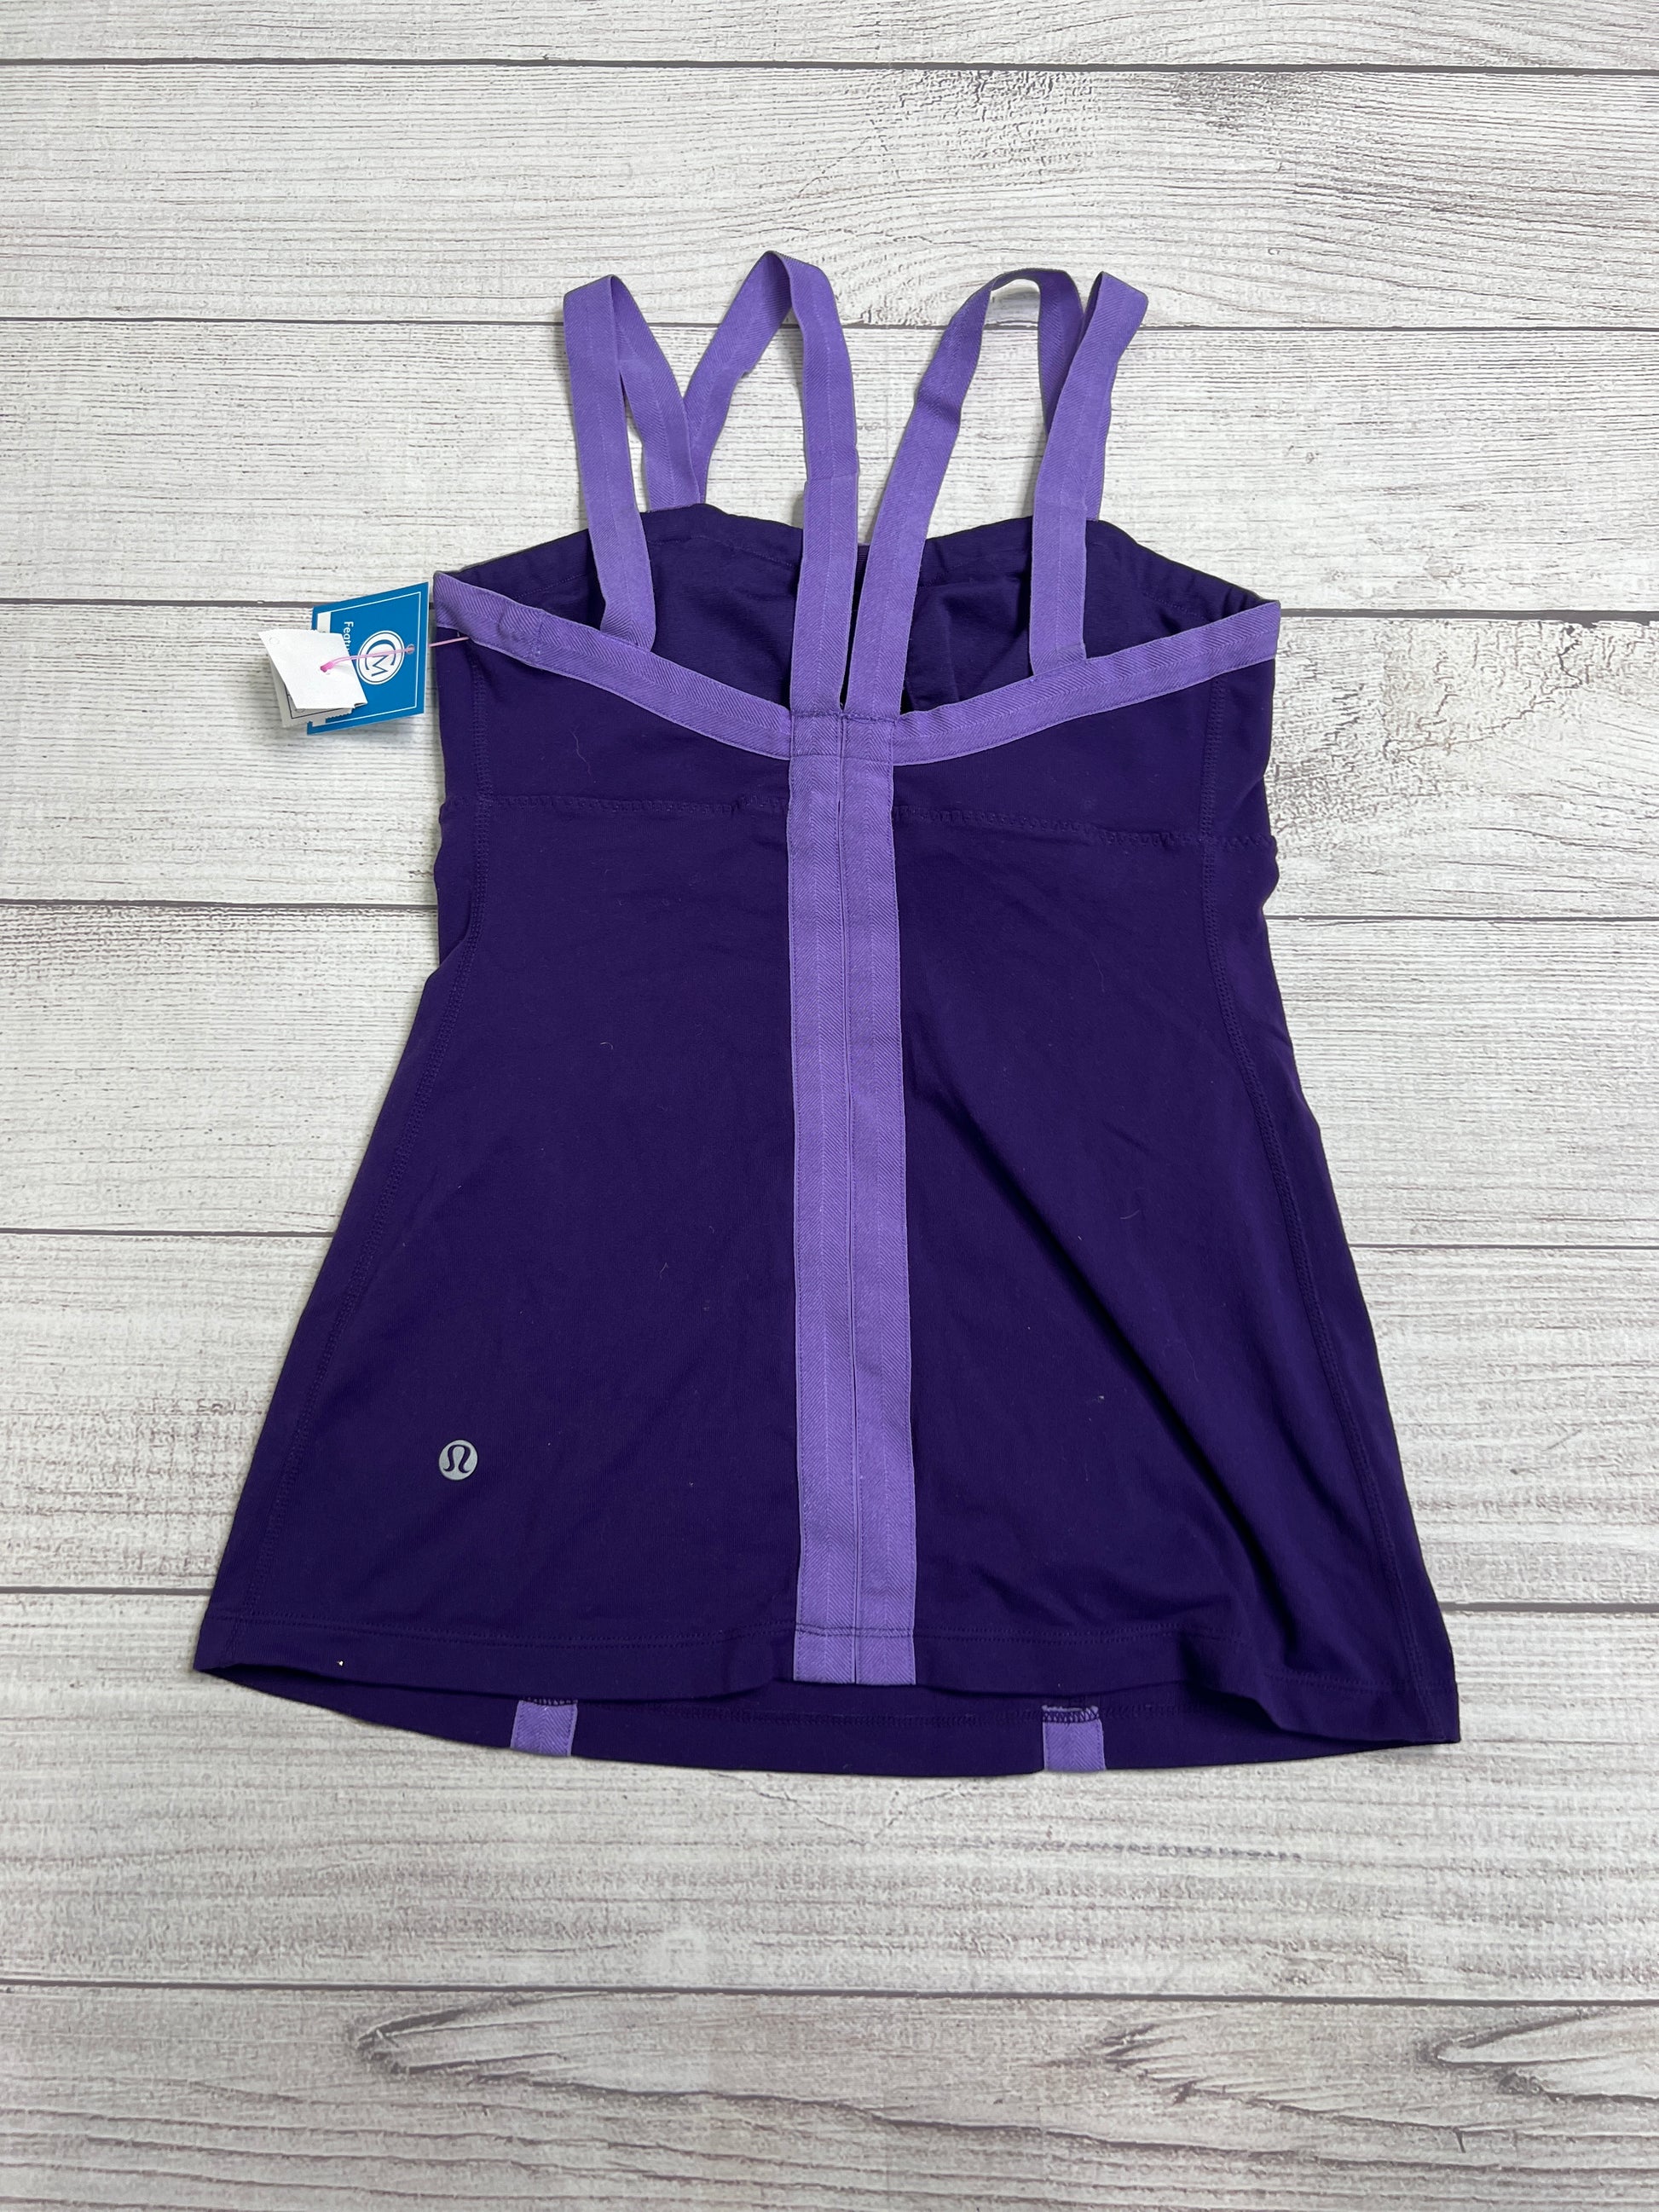 Athletic Tank Top By Lululemon Size: M